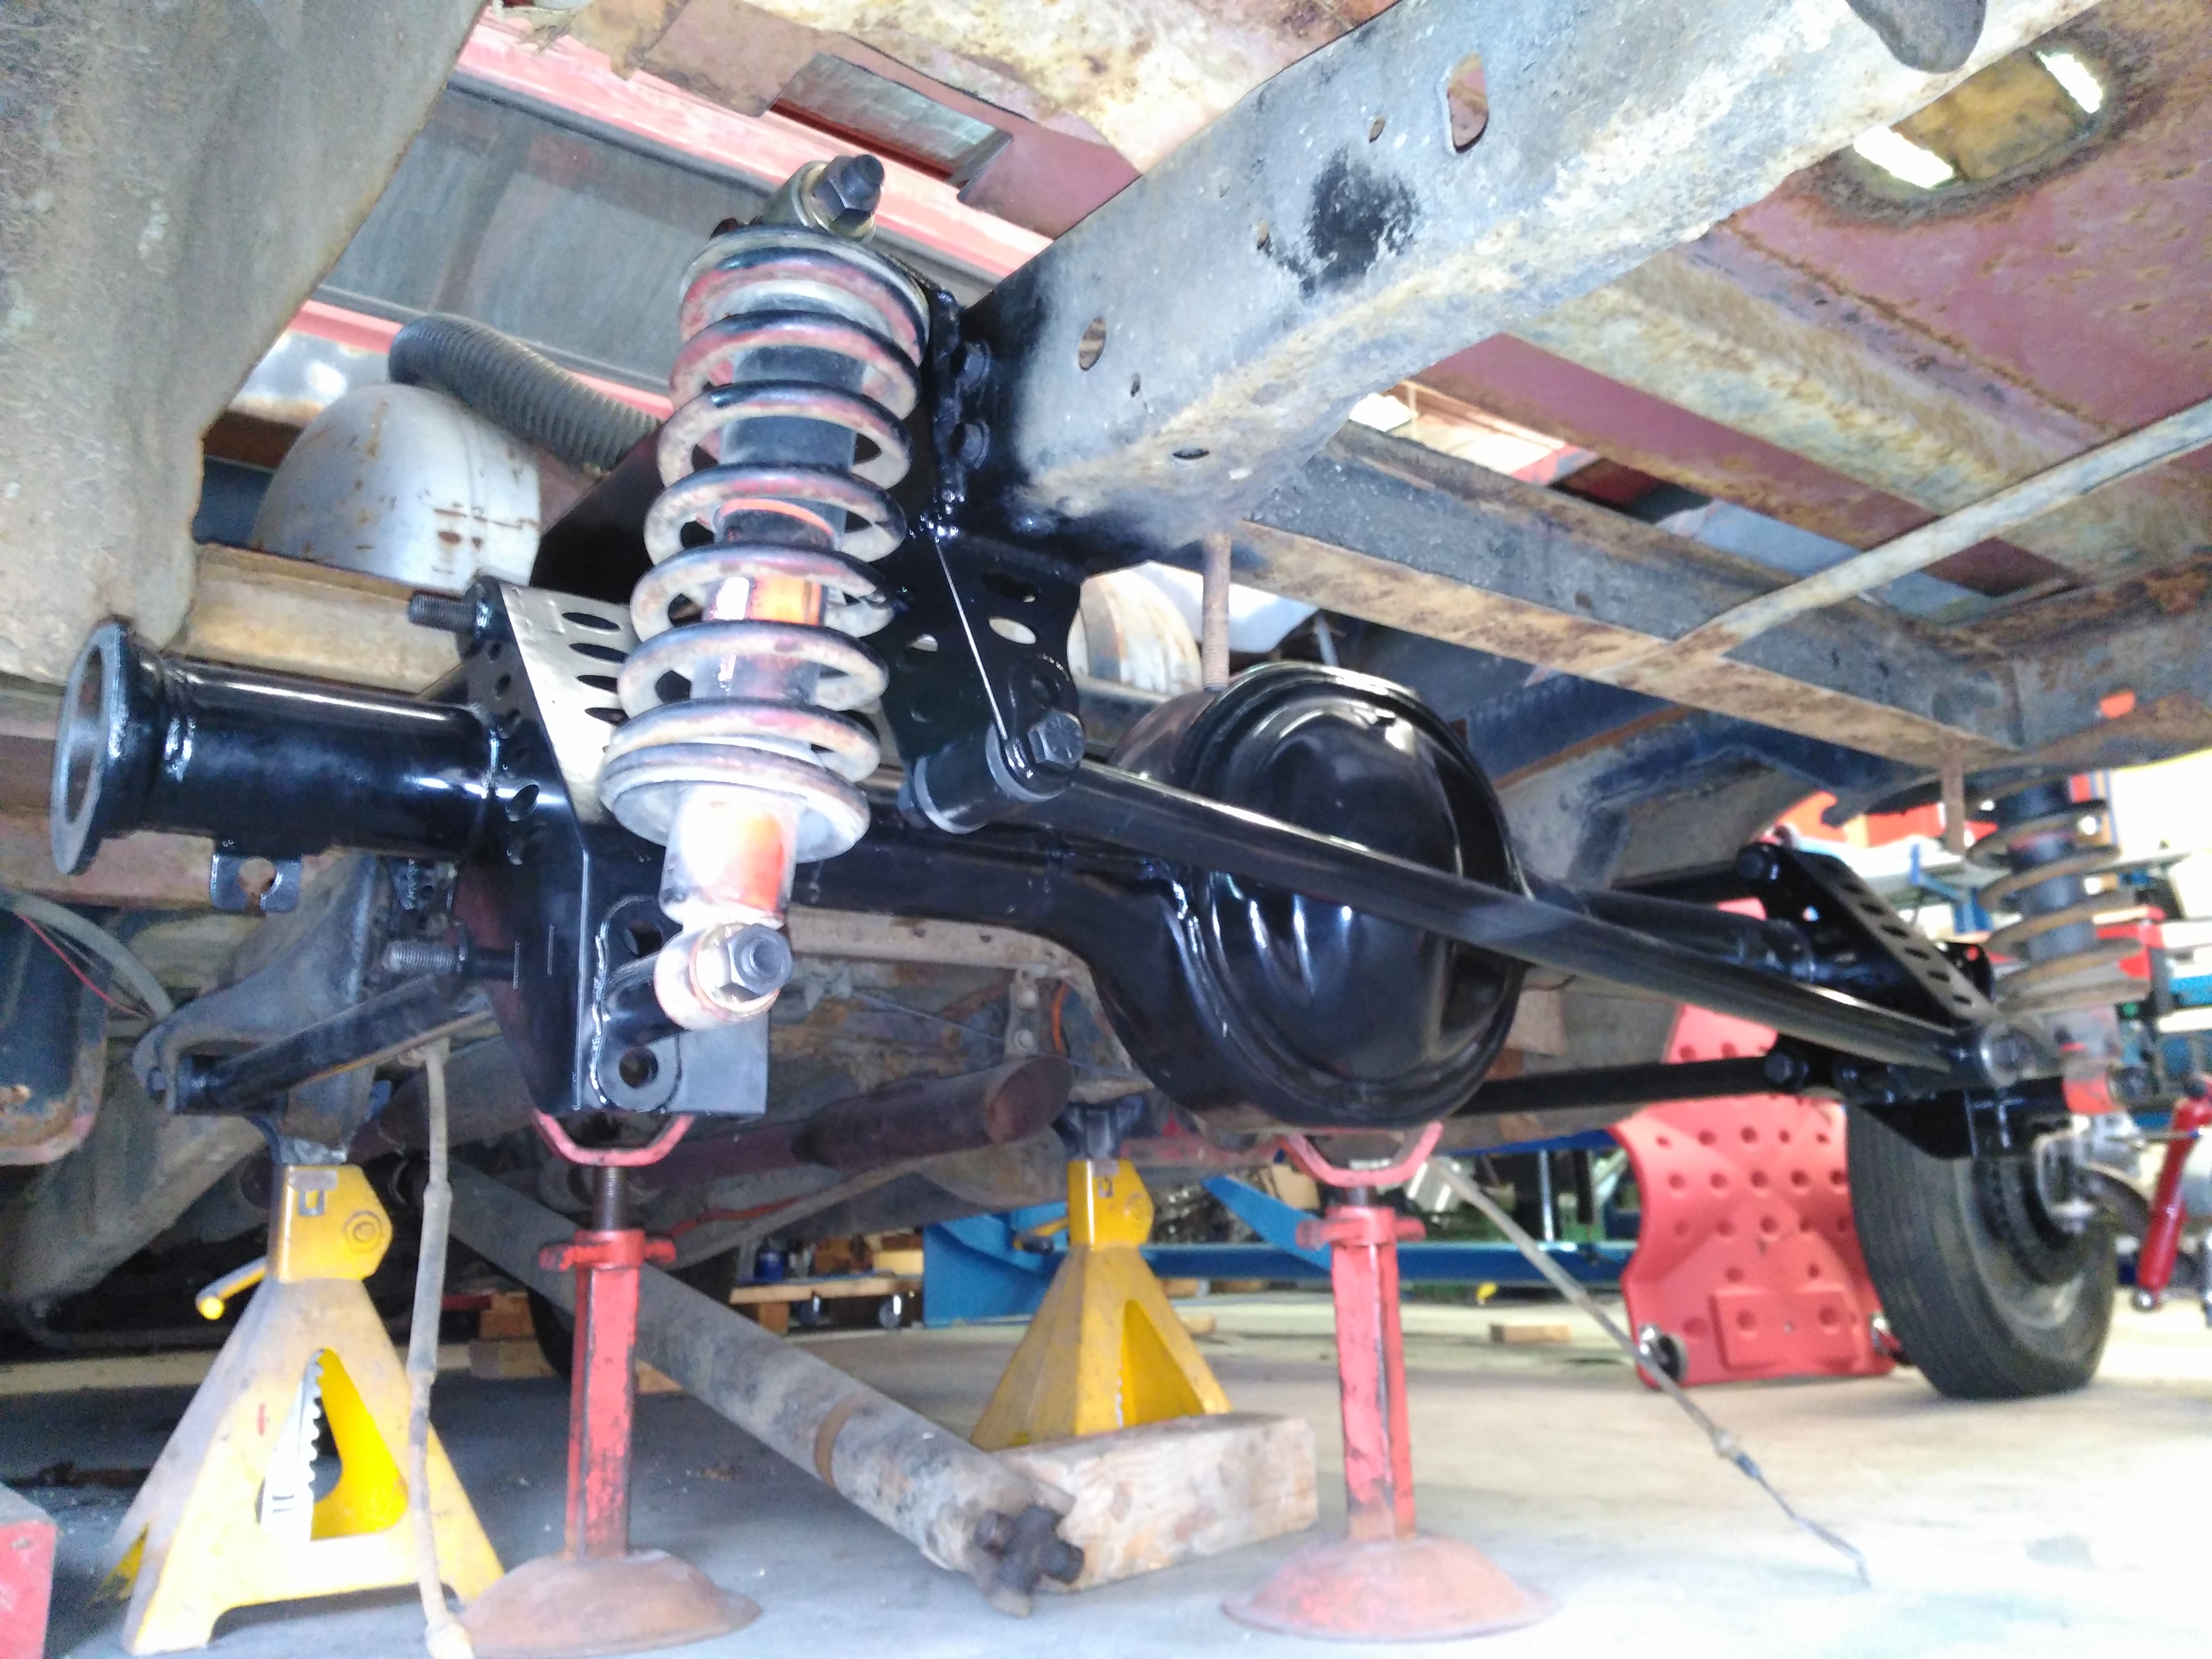 F100 rear 4 link, pan hard bar and coil overs with notched chassis